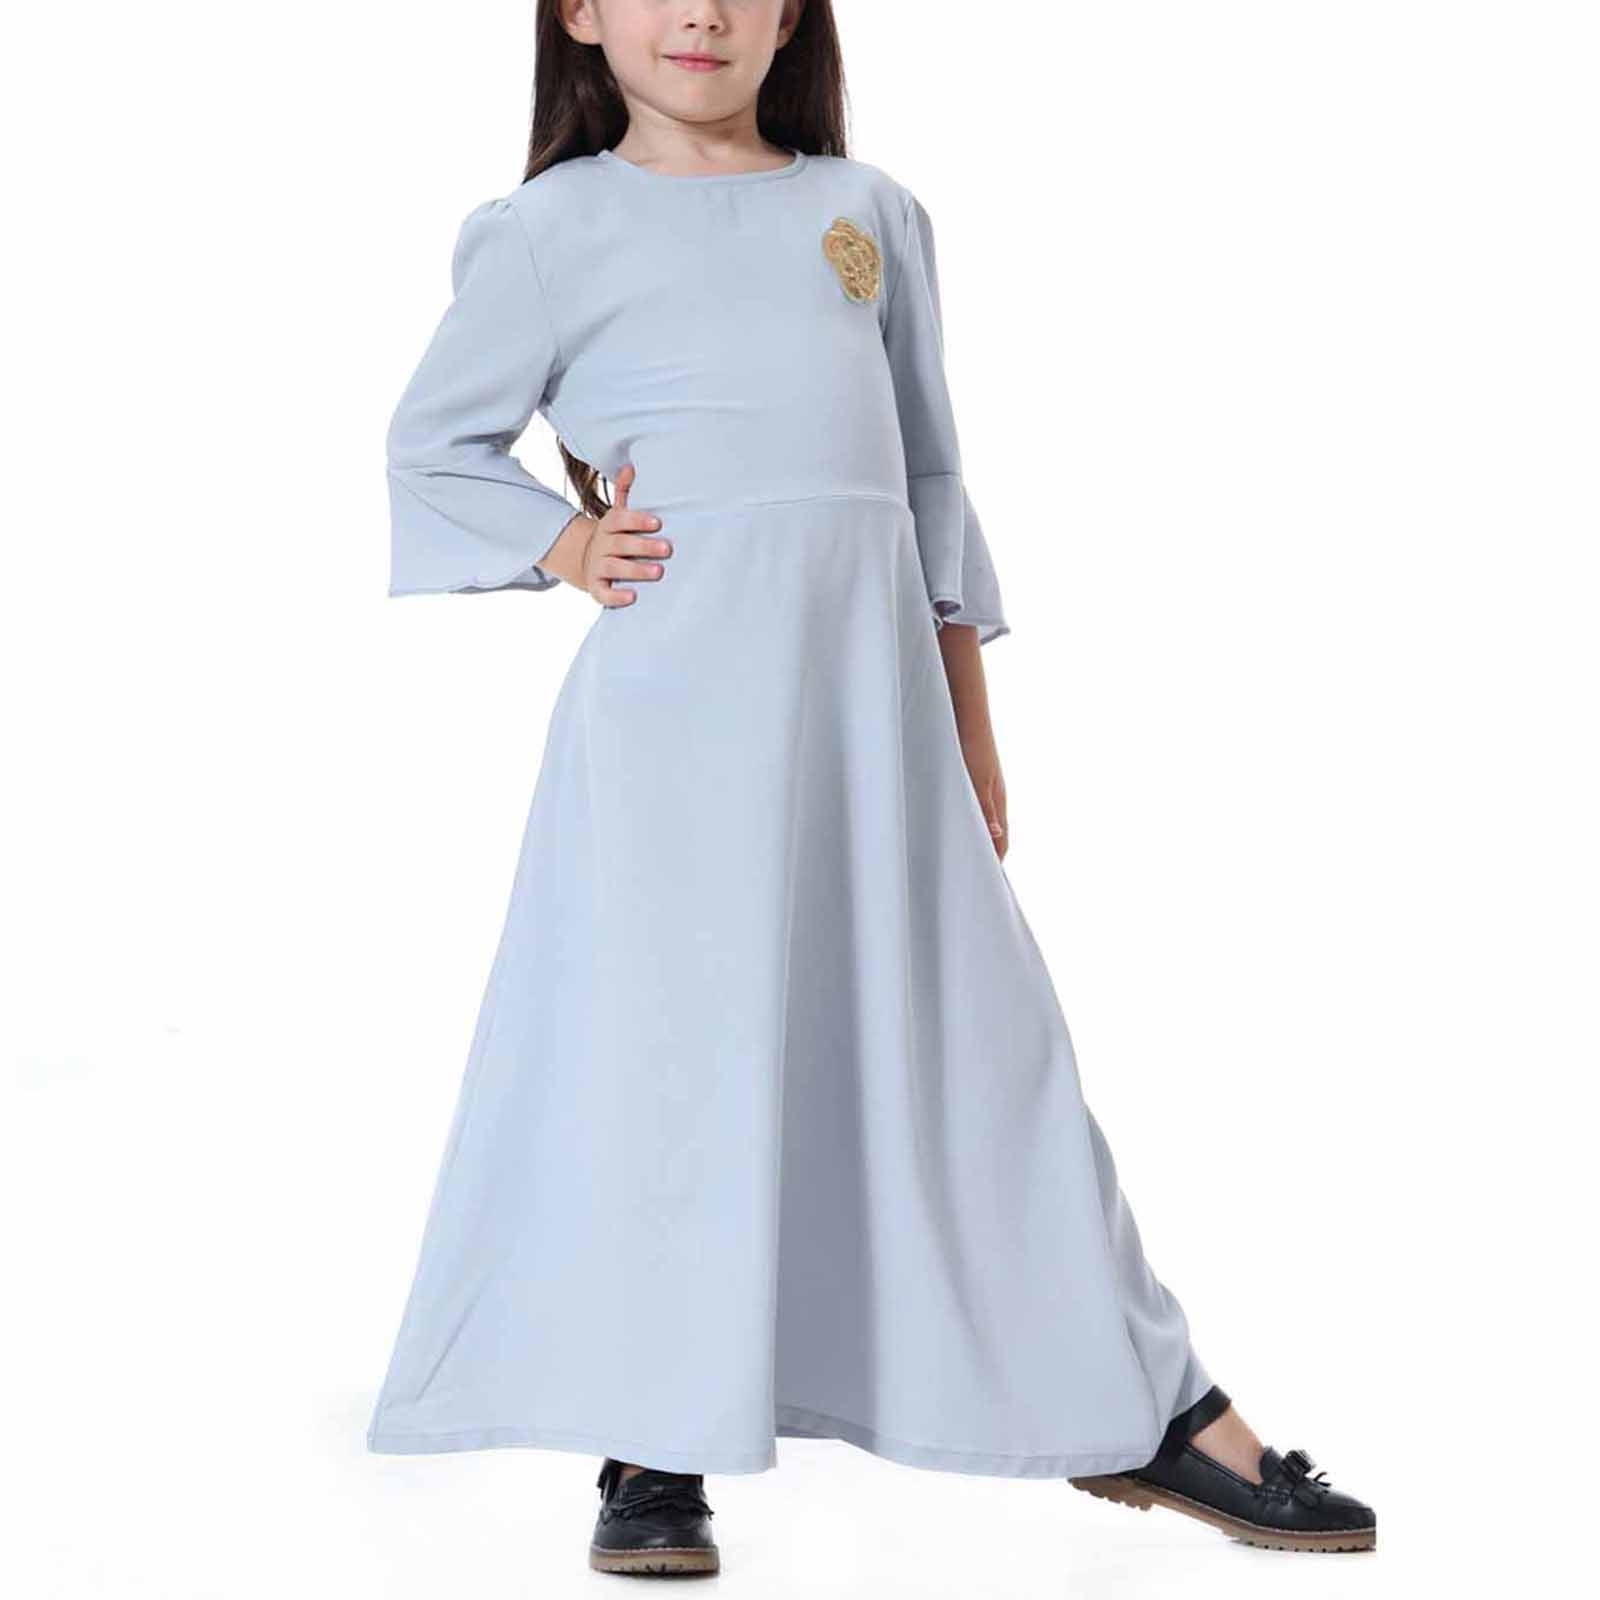 SDJMa Girls Maxi Dress Kids Solid Long Sleeve Casual Dresses for